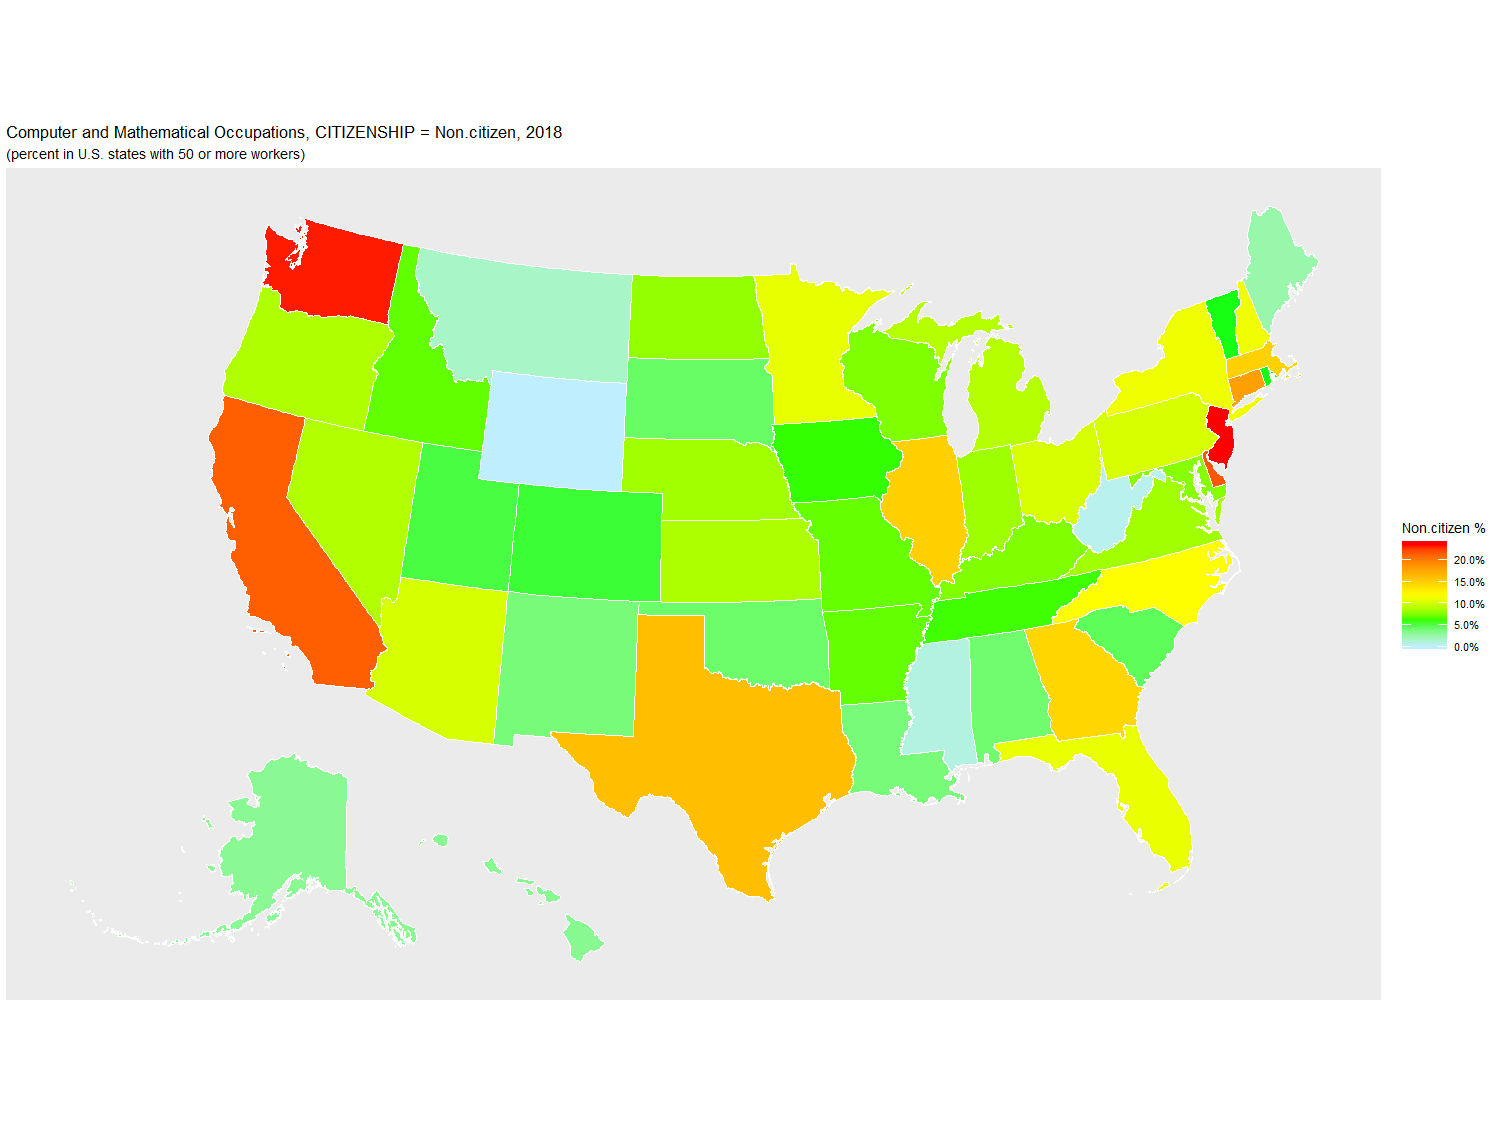 Non-citizen Percentage of Computer and Mathematical Occupations by U.S. State, 2018